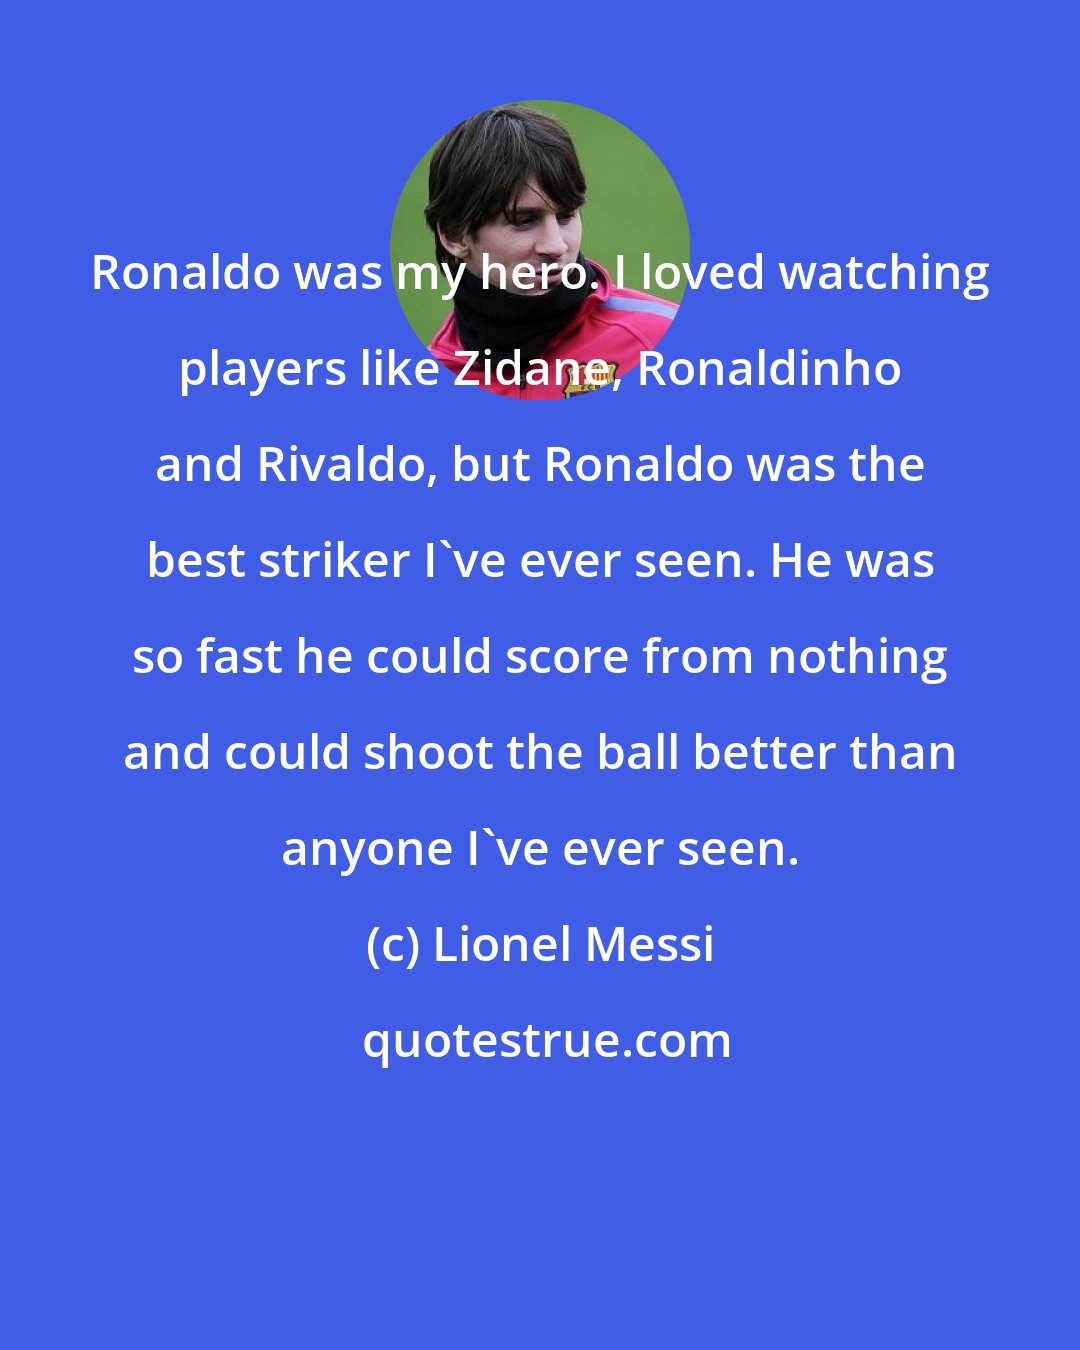 Lionel Messi: Ronaldo was my hero. I loved watching players like Zidane, Ronaldinho and Rivaldo, but Ronaldo was the best striker I've ever seen. He was so fast he could score from nothing and could shoot the ball better than anyone I've ever seen.